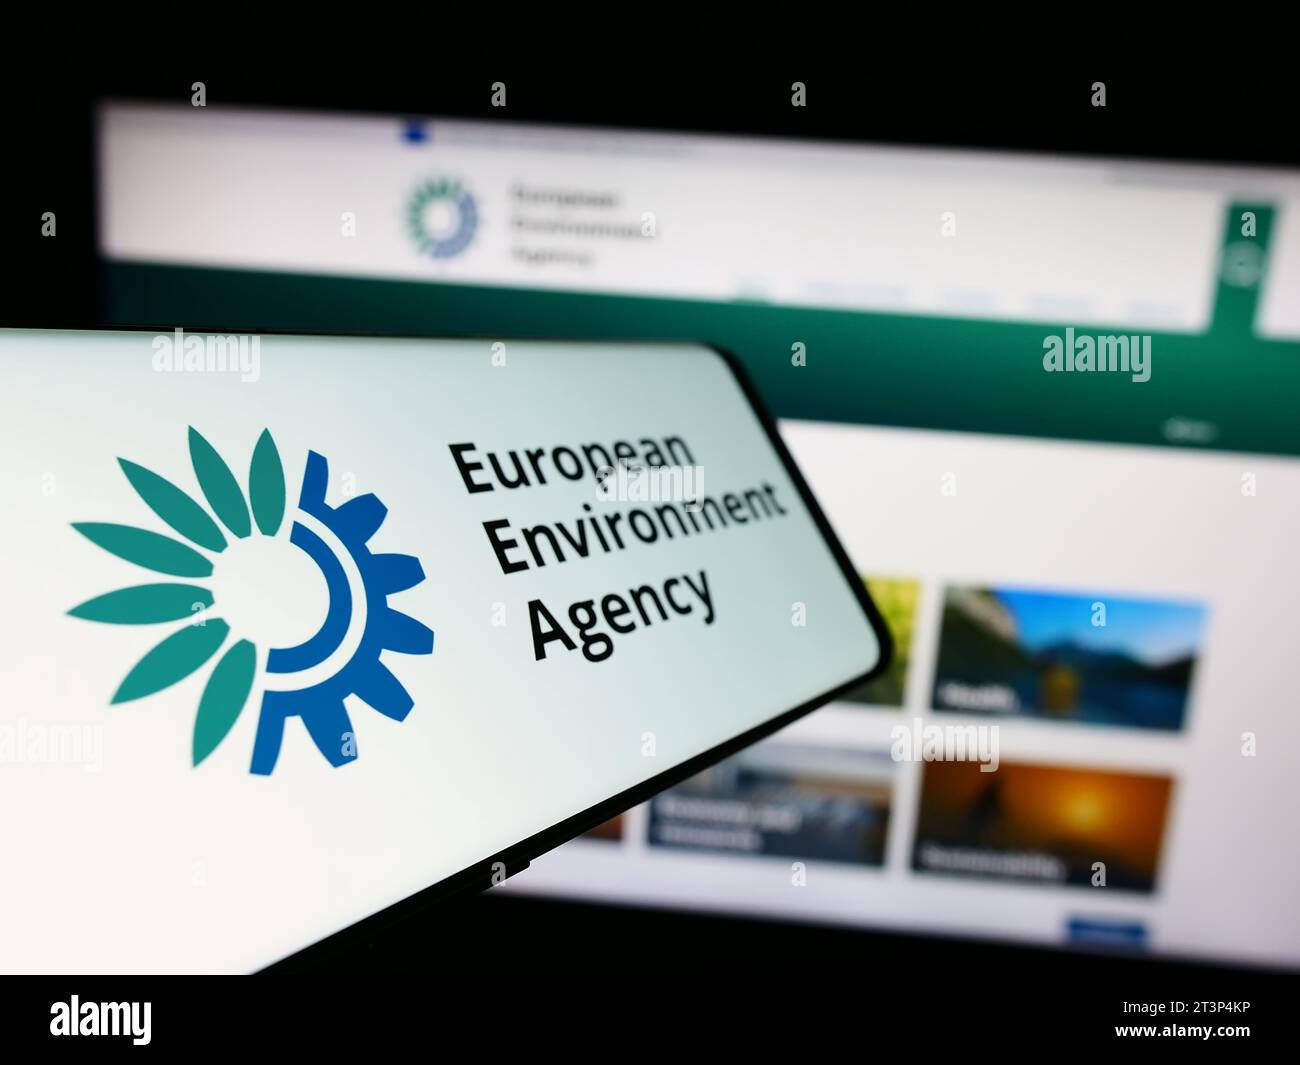 Smartphone with logo of EU institution European Environment Agency (EEA) in front of website. Focus on center-left of phone display. Stock Photo